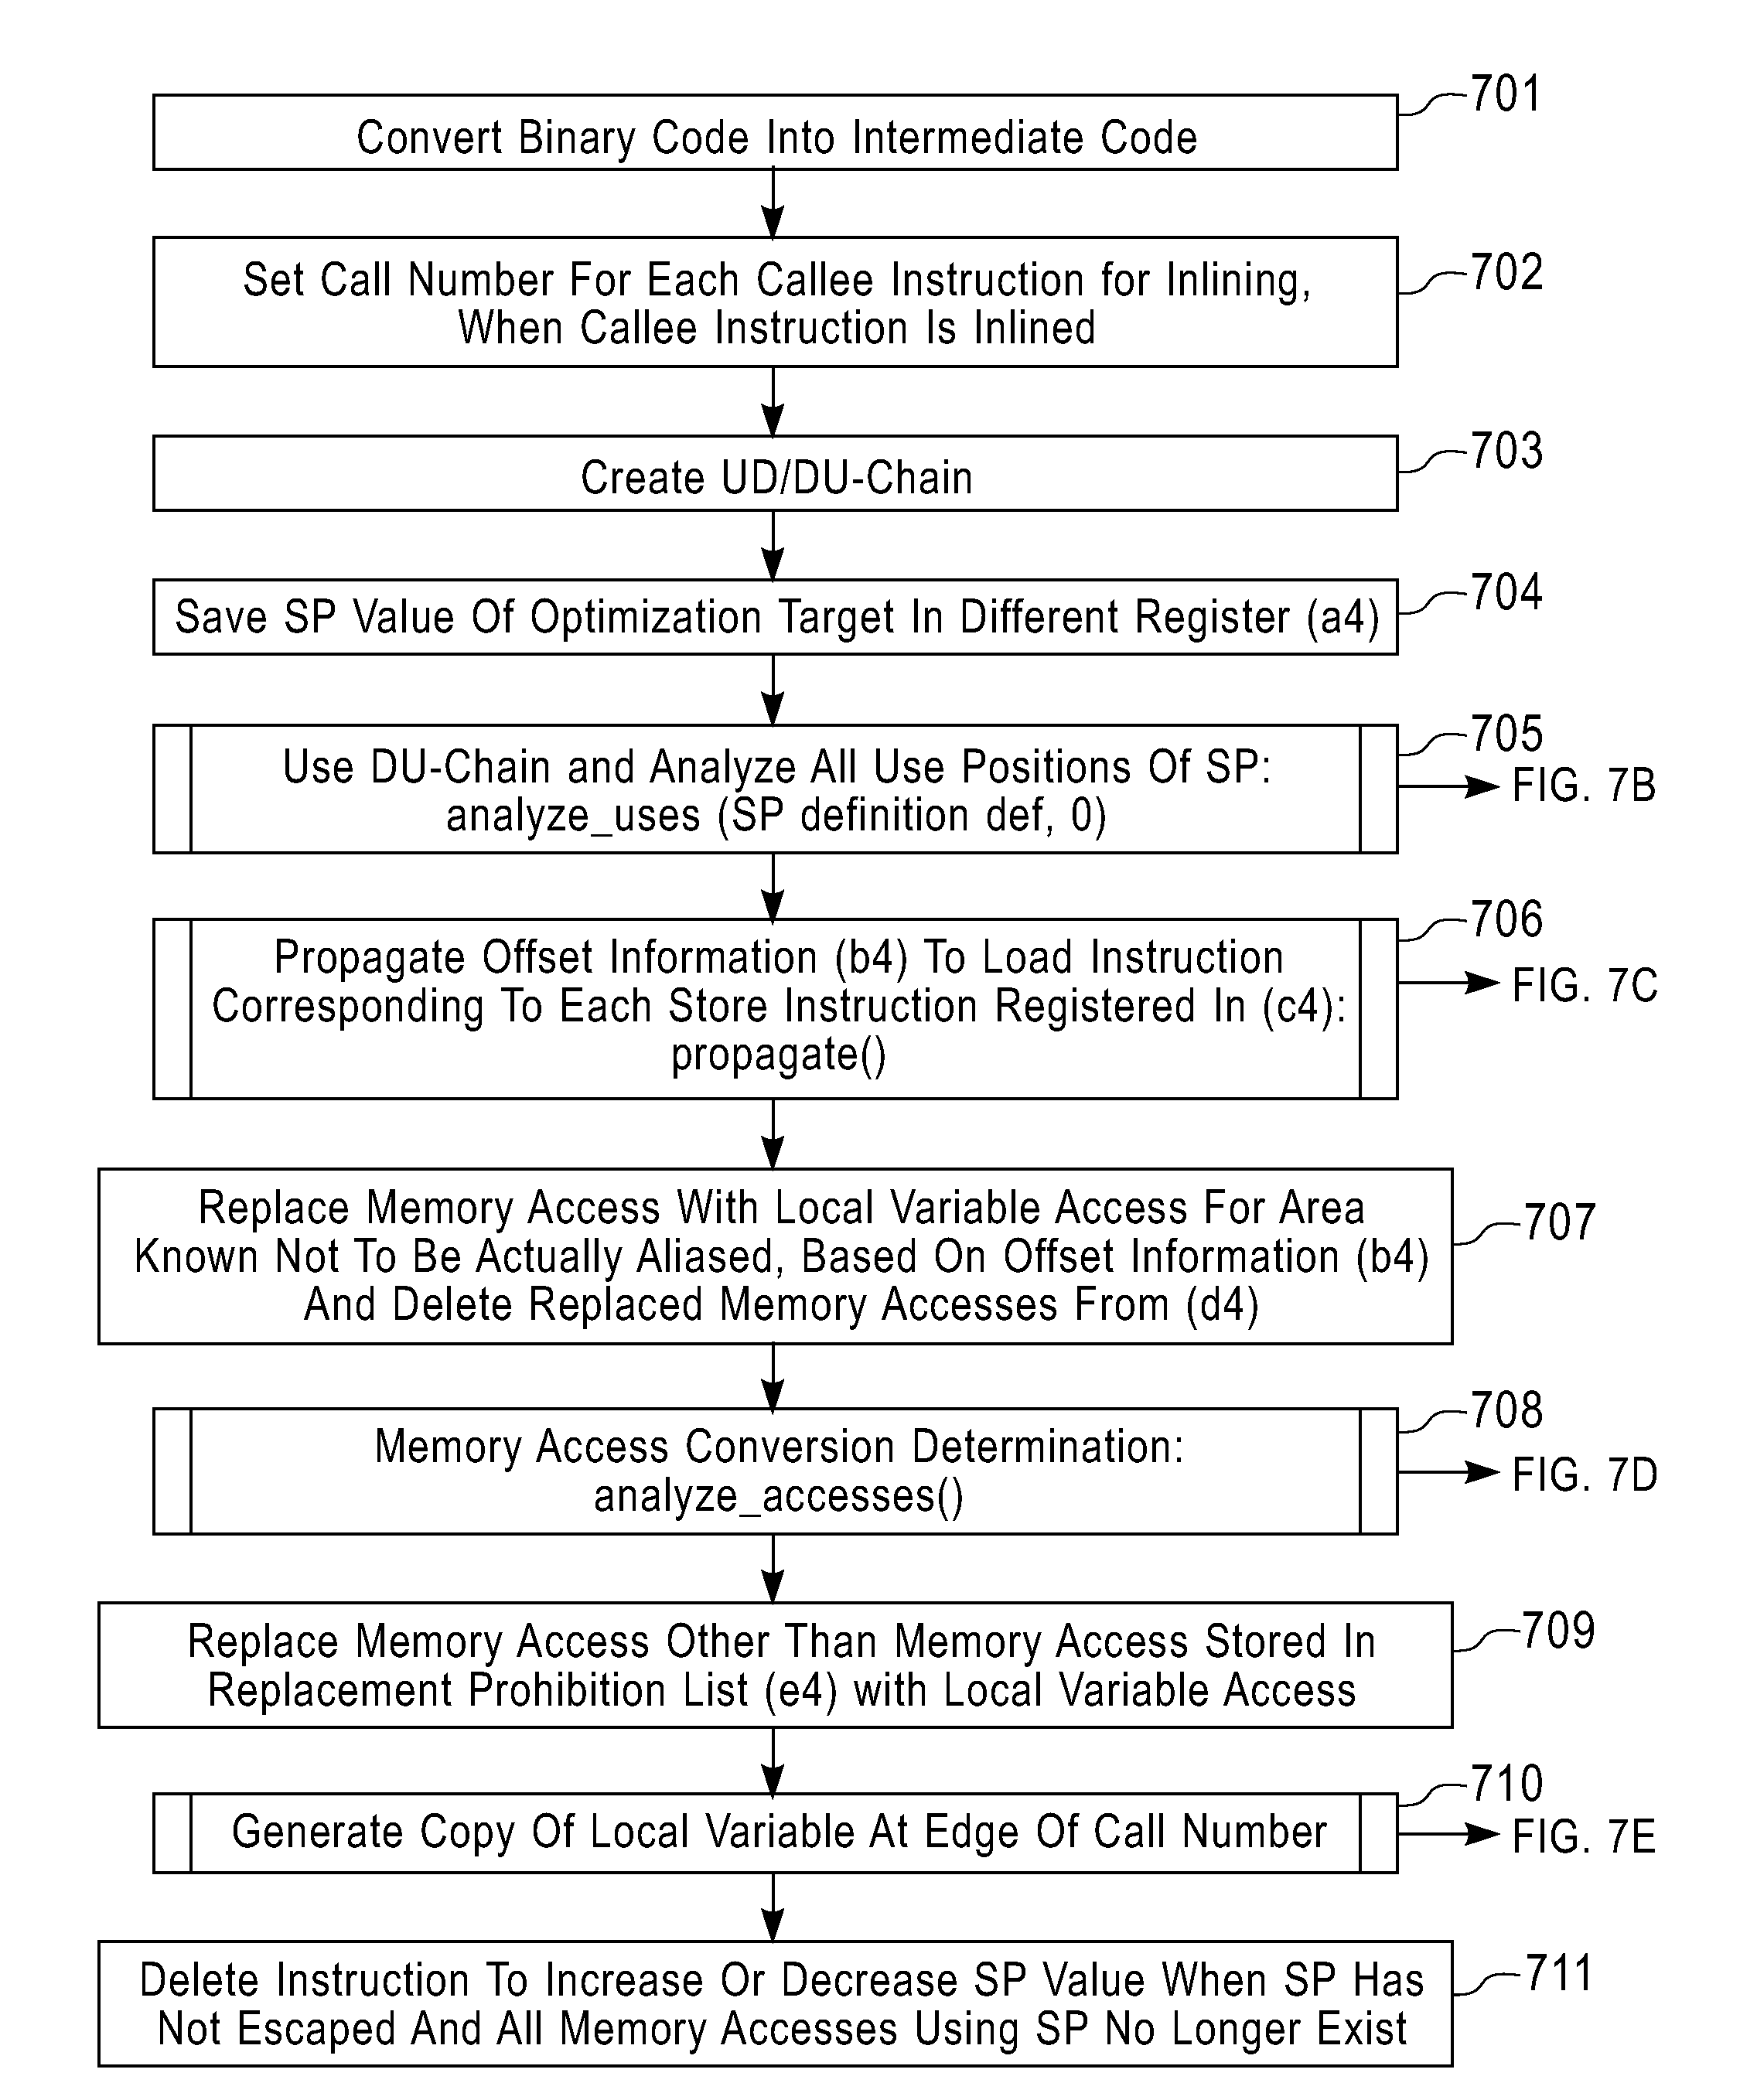 Compiling system and method for optimizing binary code